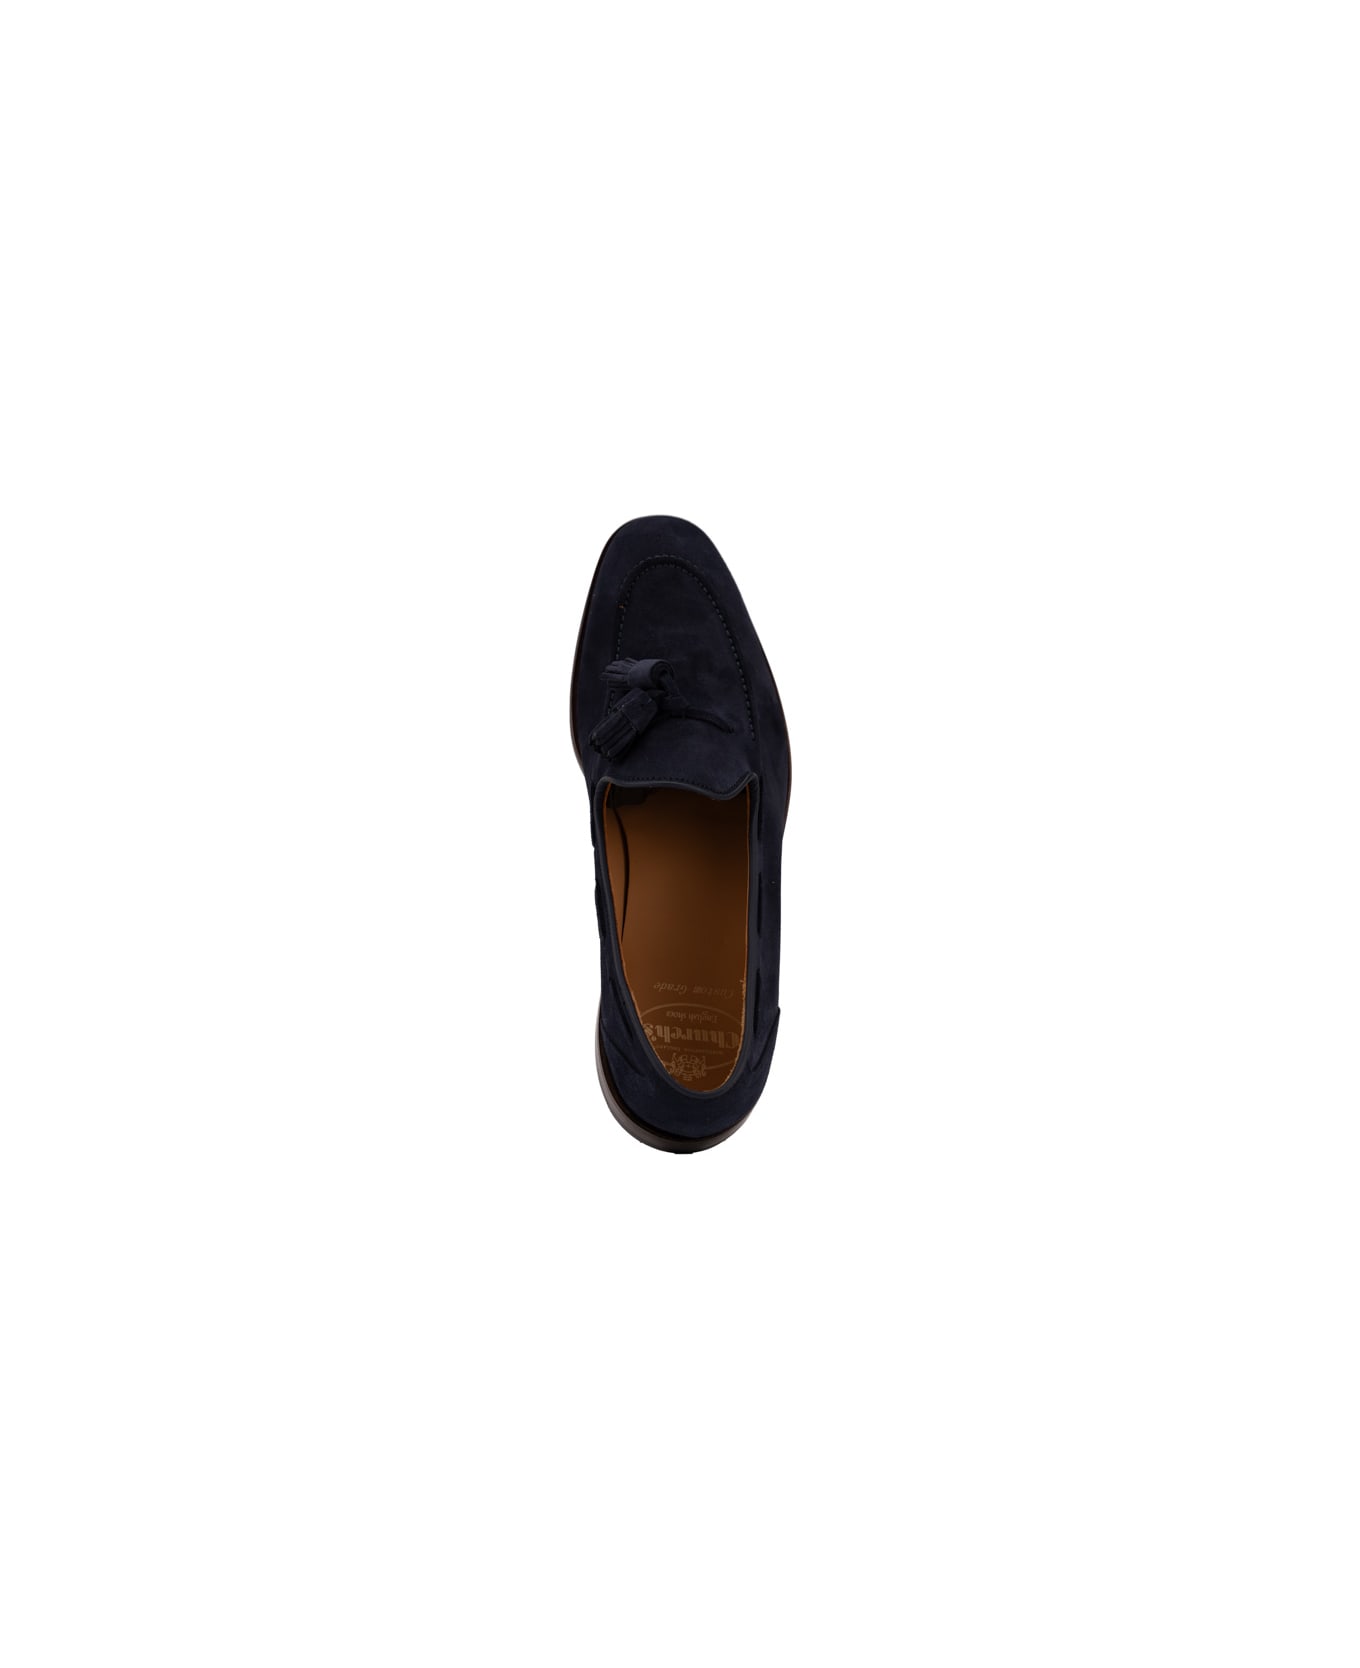 Church's Blue Suede Loafers With Tassels - Navy